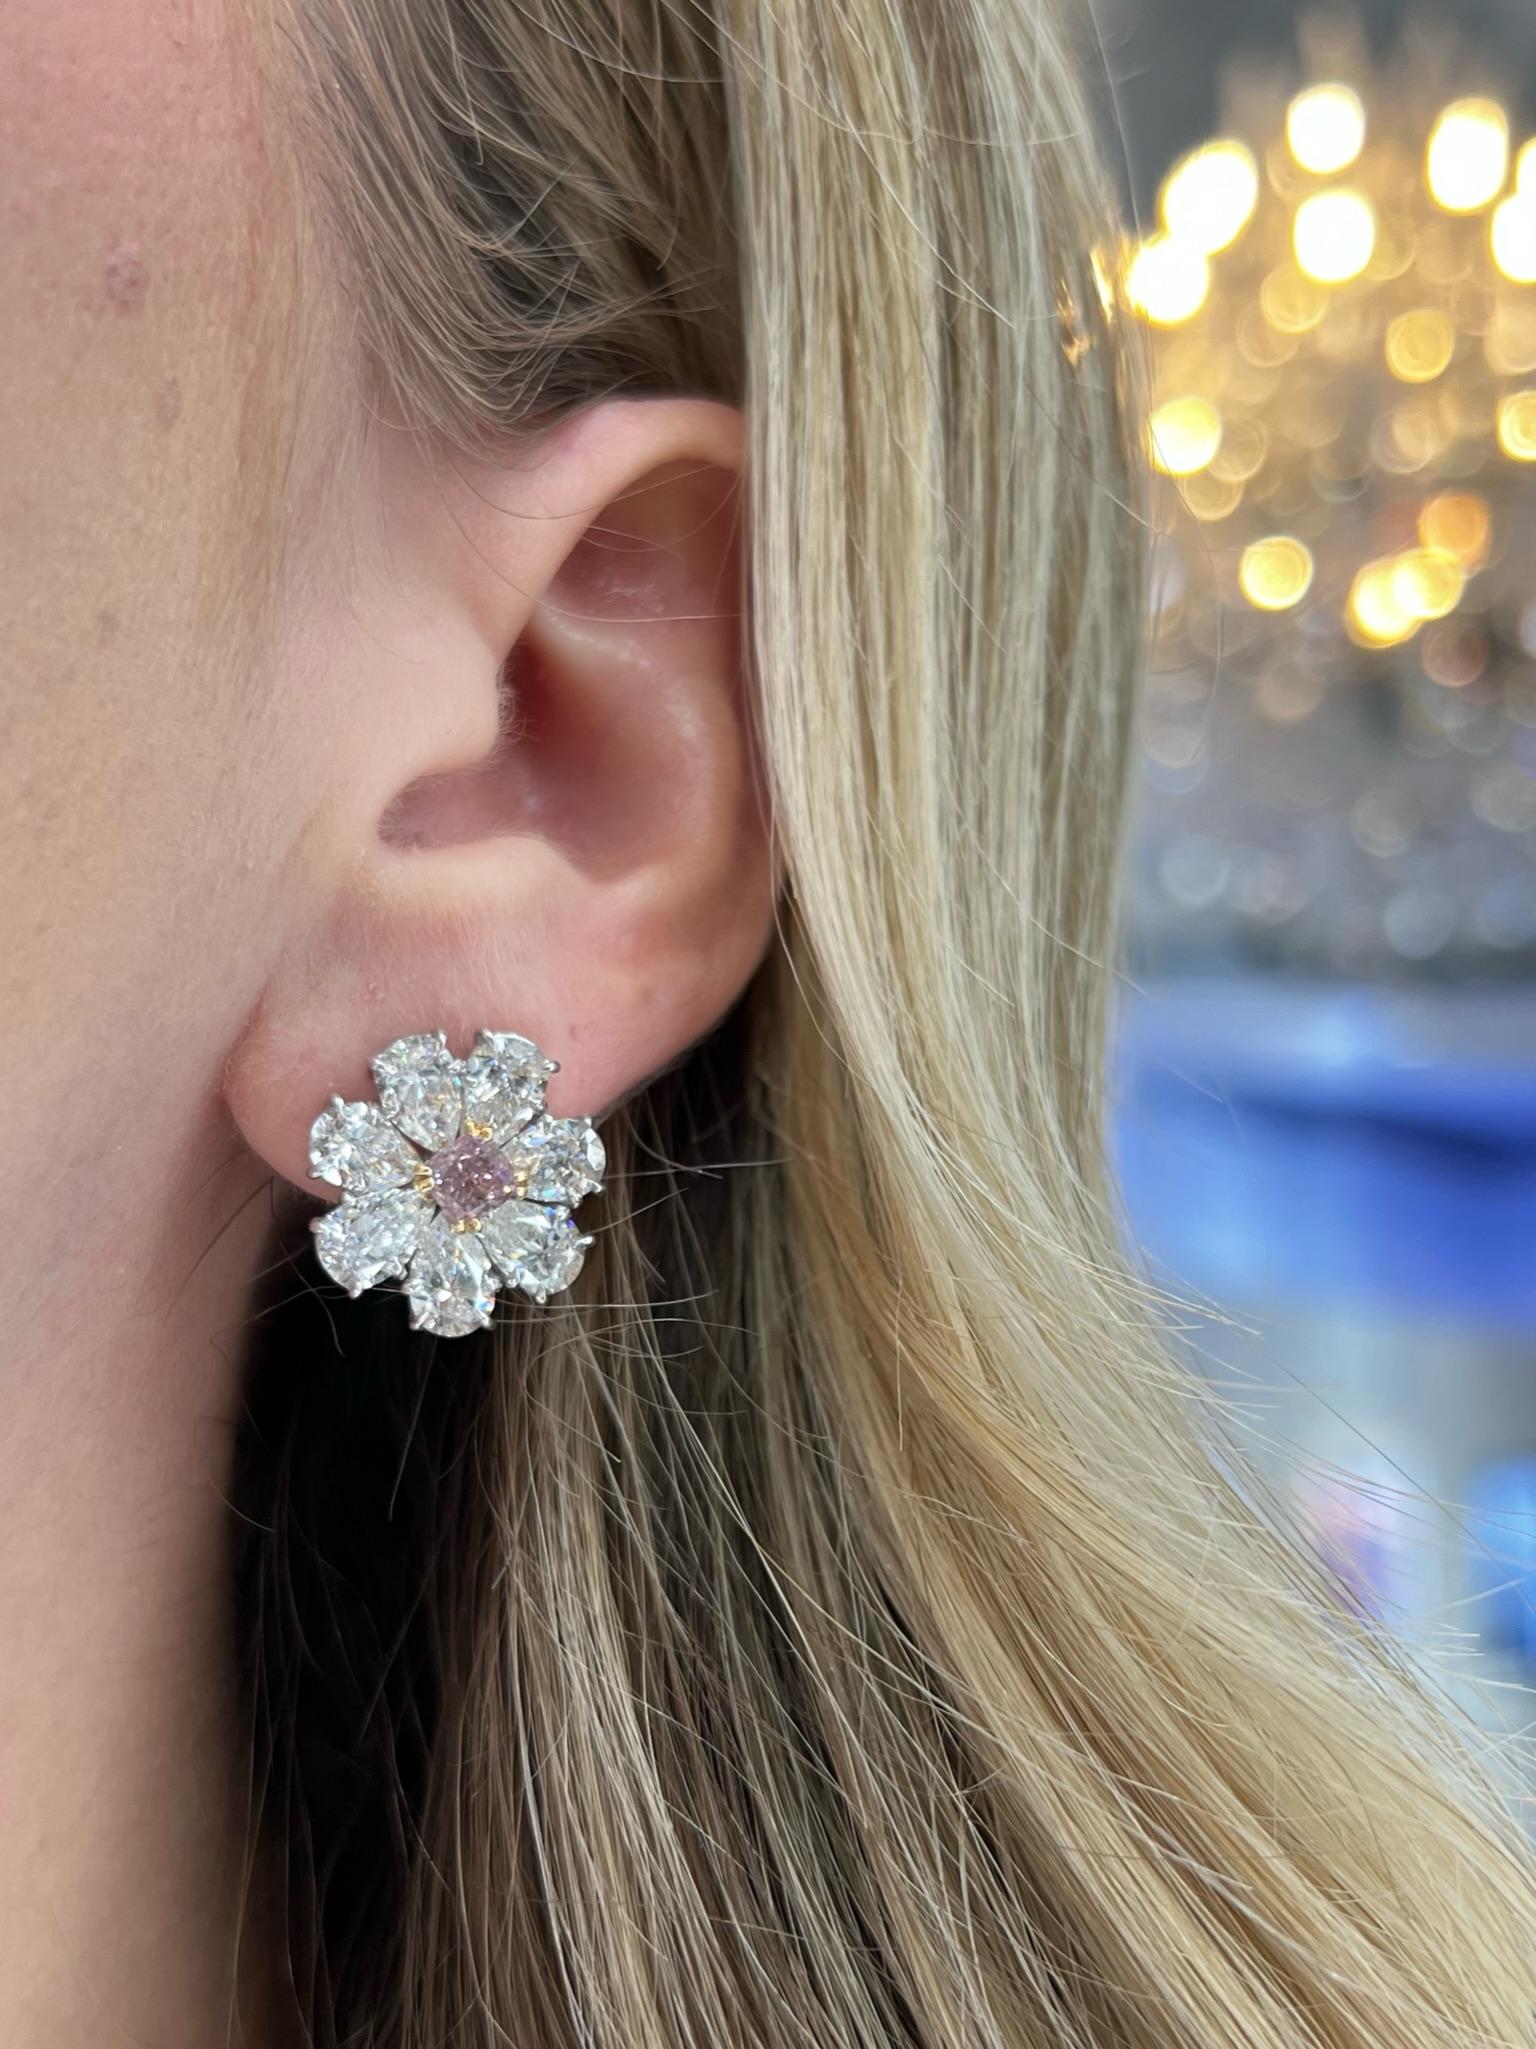 Earrings by David Rosenberg. These Mesmerizing Bubble Gum Color Fancy Purple Pink Radiant Diamond Earrings are surrounded by perfectly matched Collection Color Pear Shapes, 8.21 total weight All diamonds are accompanied by GIA Certification 

David